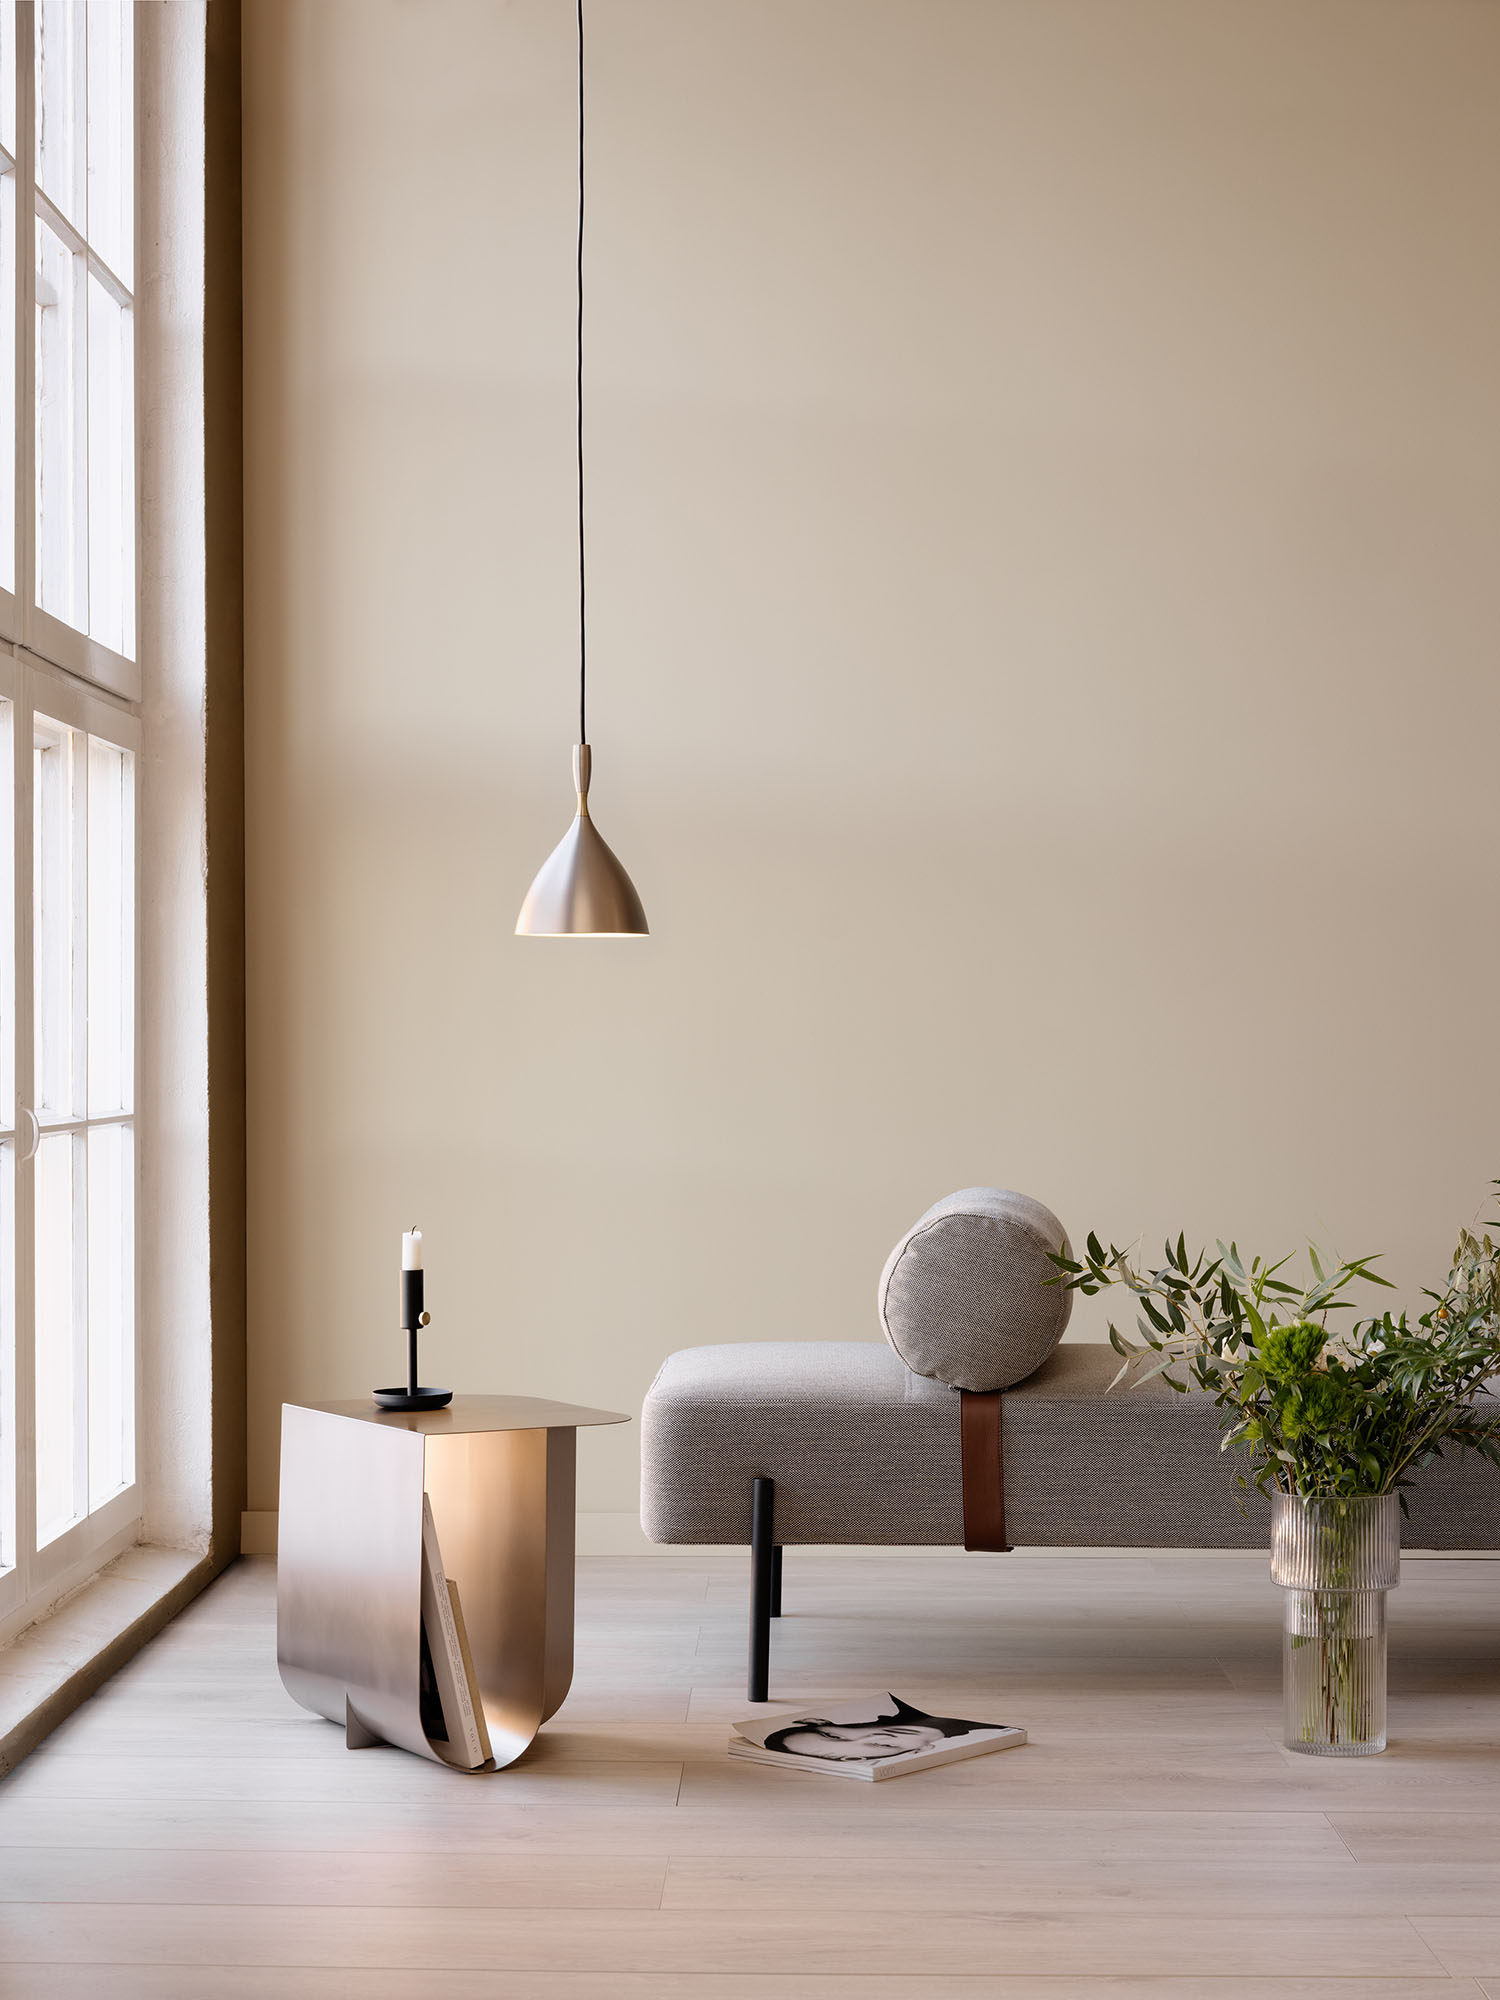 Daybe_daybed_Dokka_pendant_Mass_table_Northern_Ph_Einar_Aslaksen_Low-res